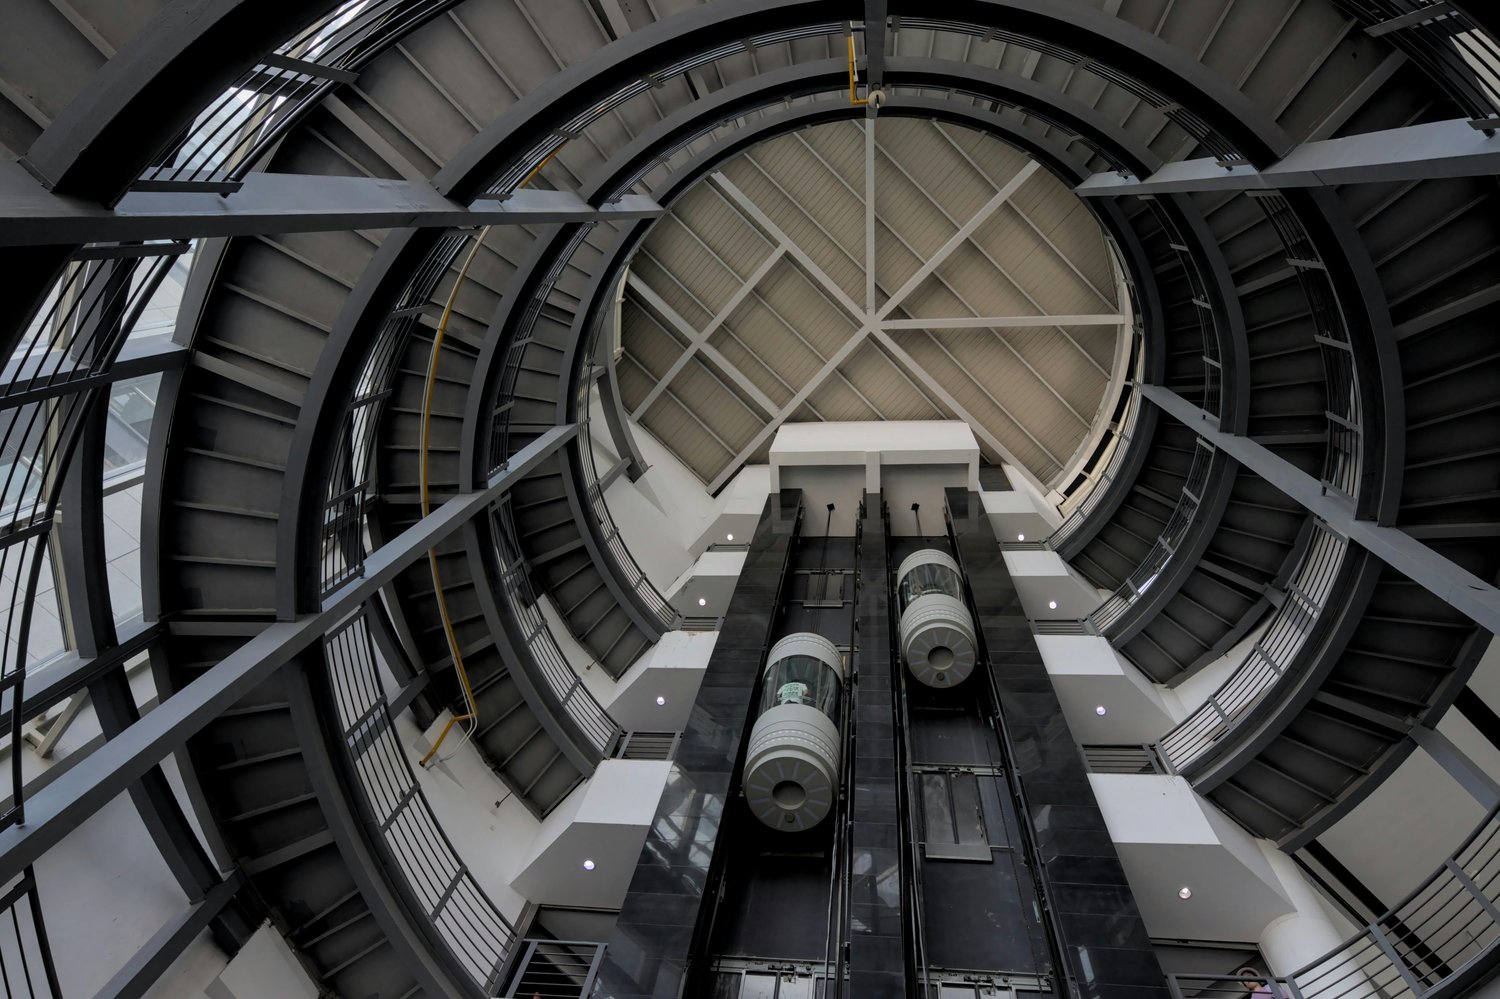 Spiral Staircase and Elevators | Photo by Kampamba from Pexels